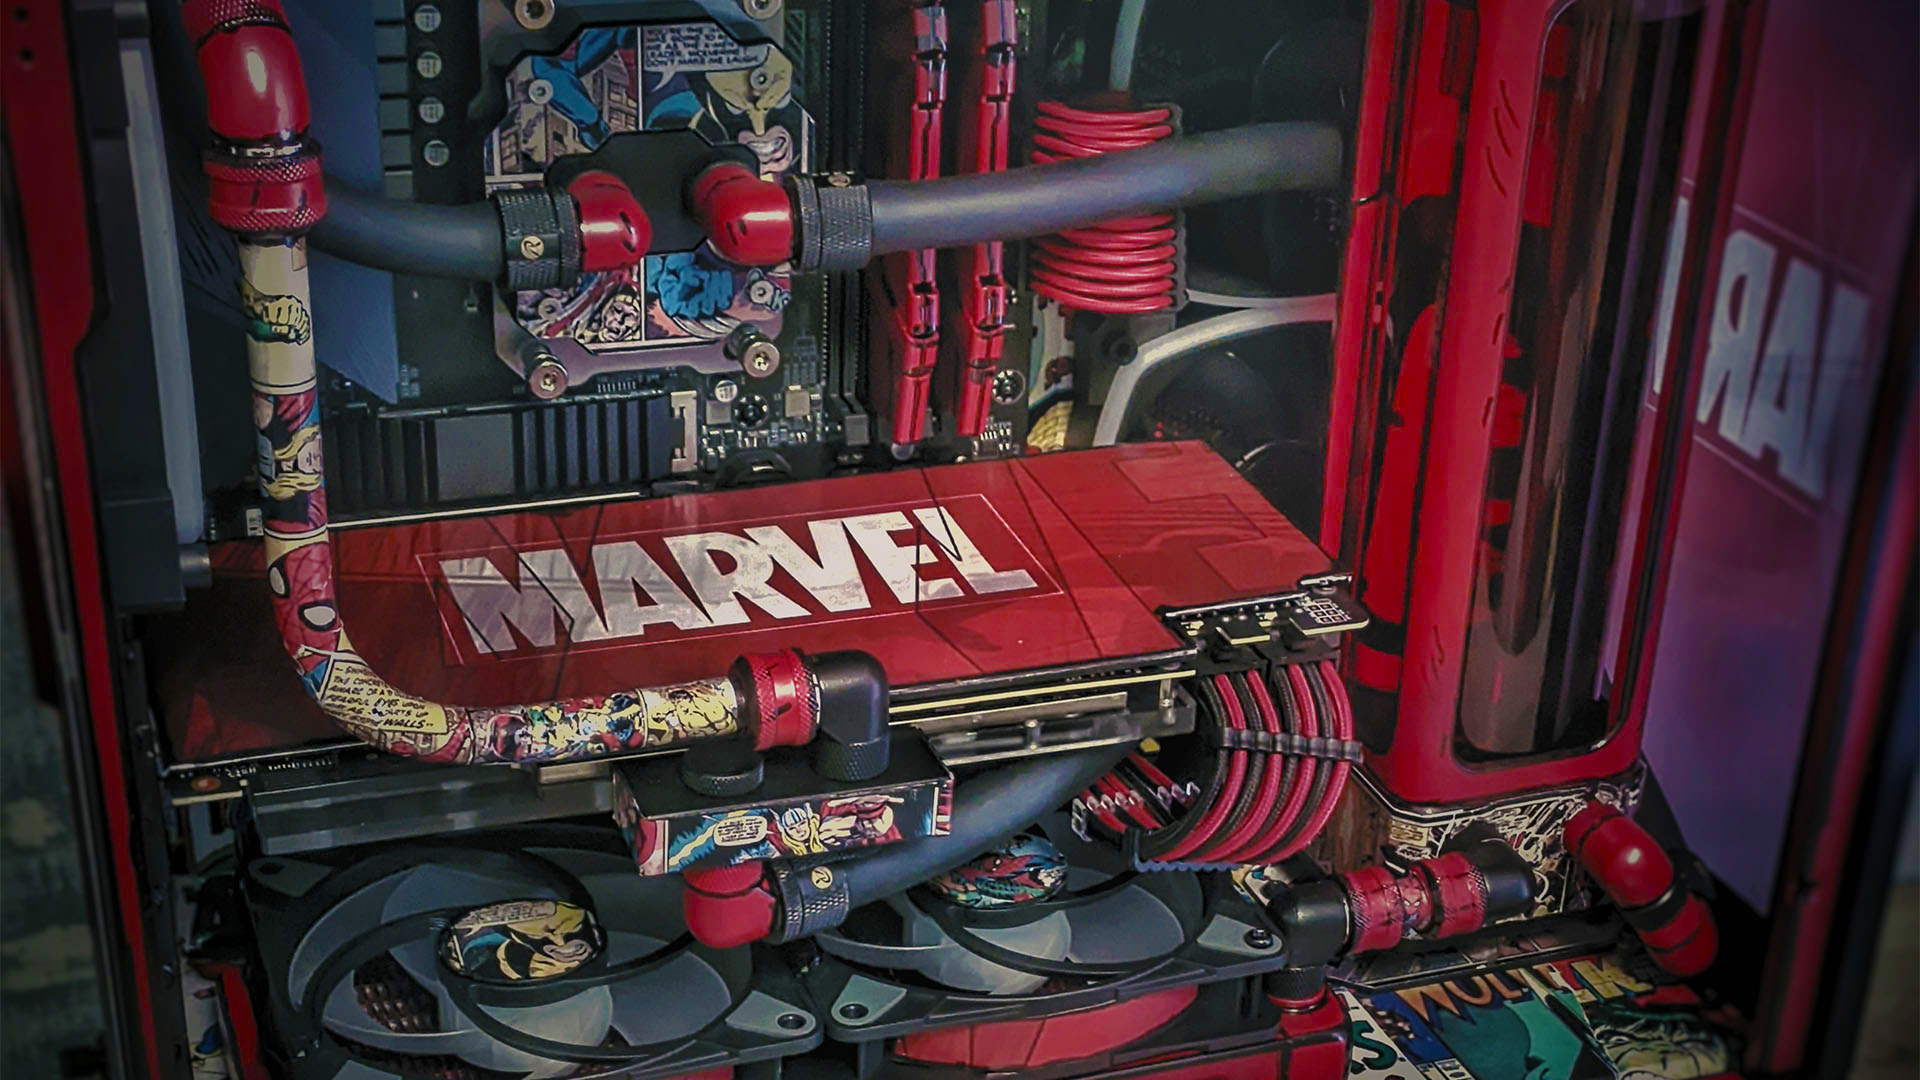 This Stan Lee Marvel comic book gaming PC is incredible